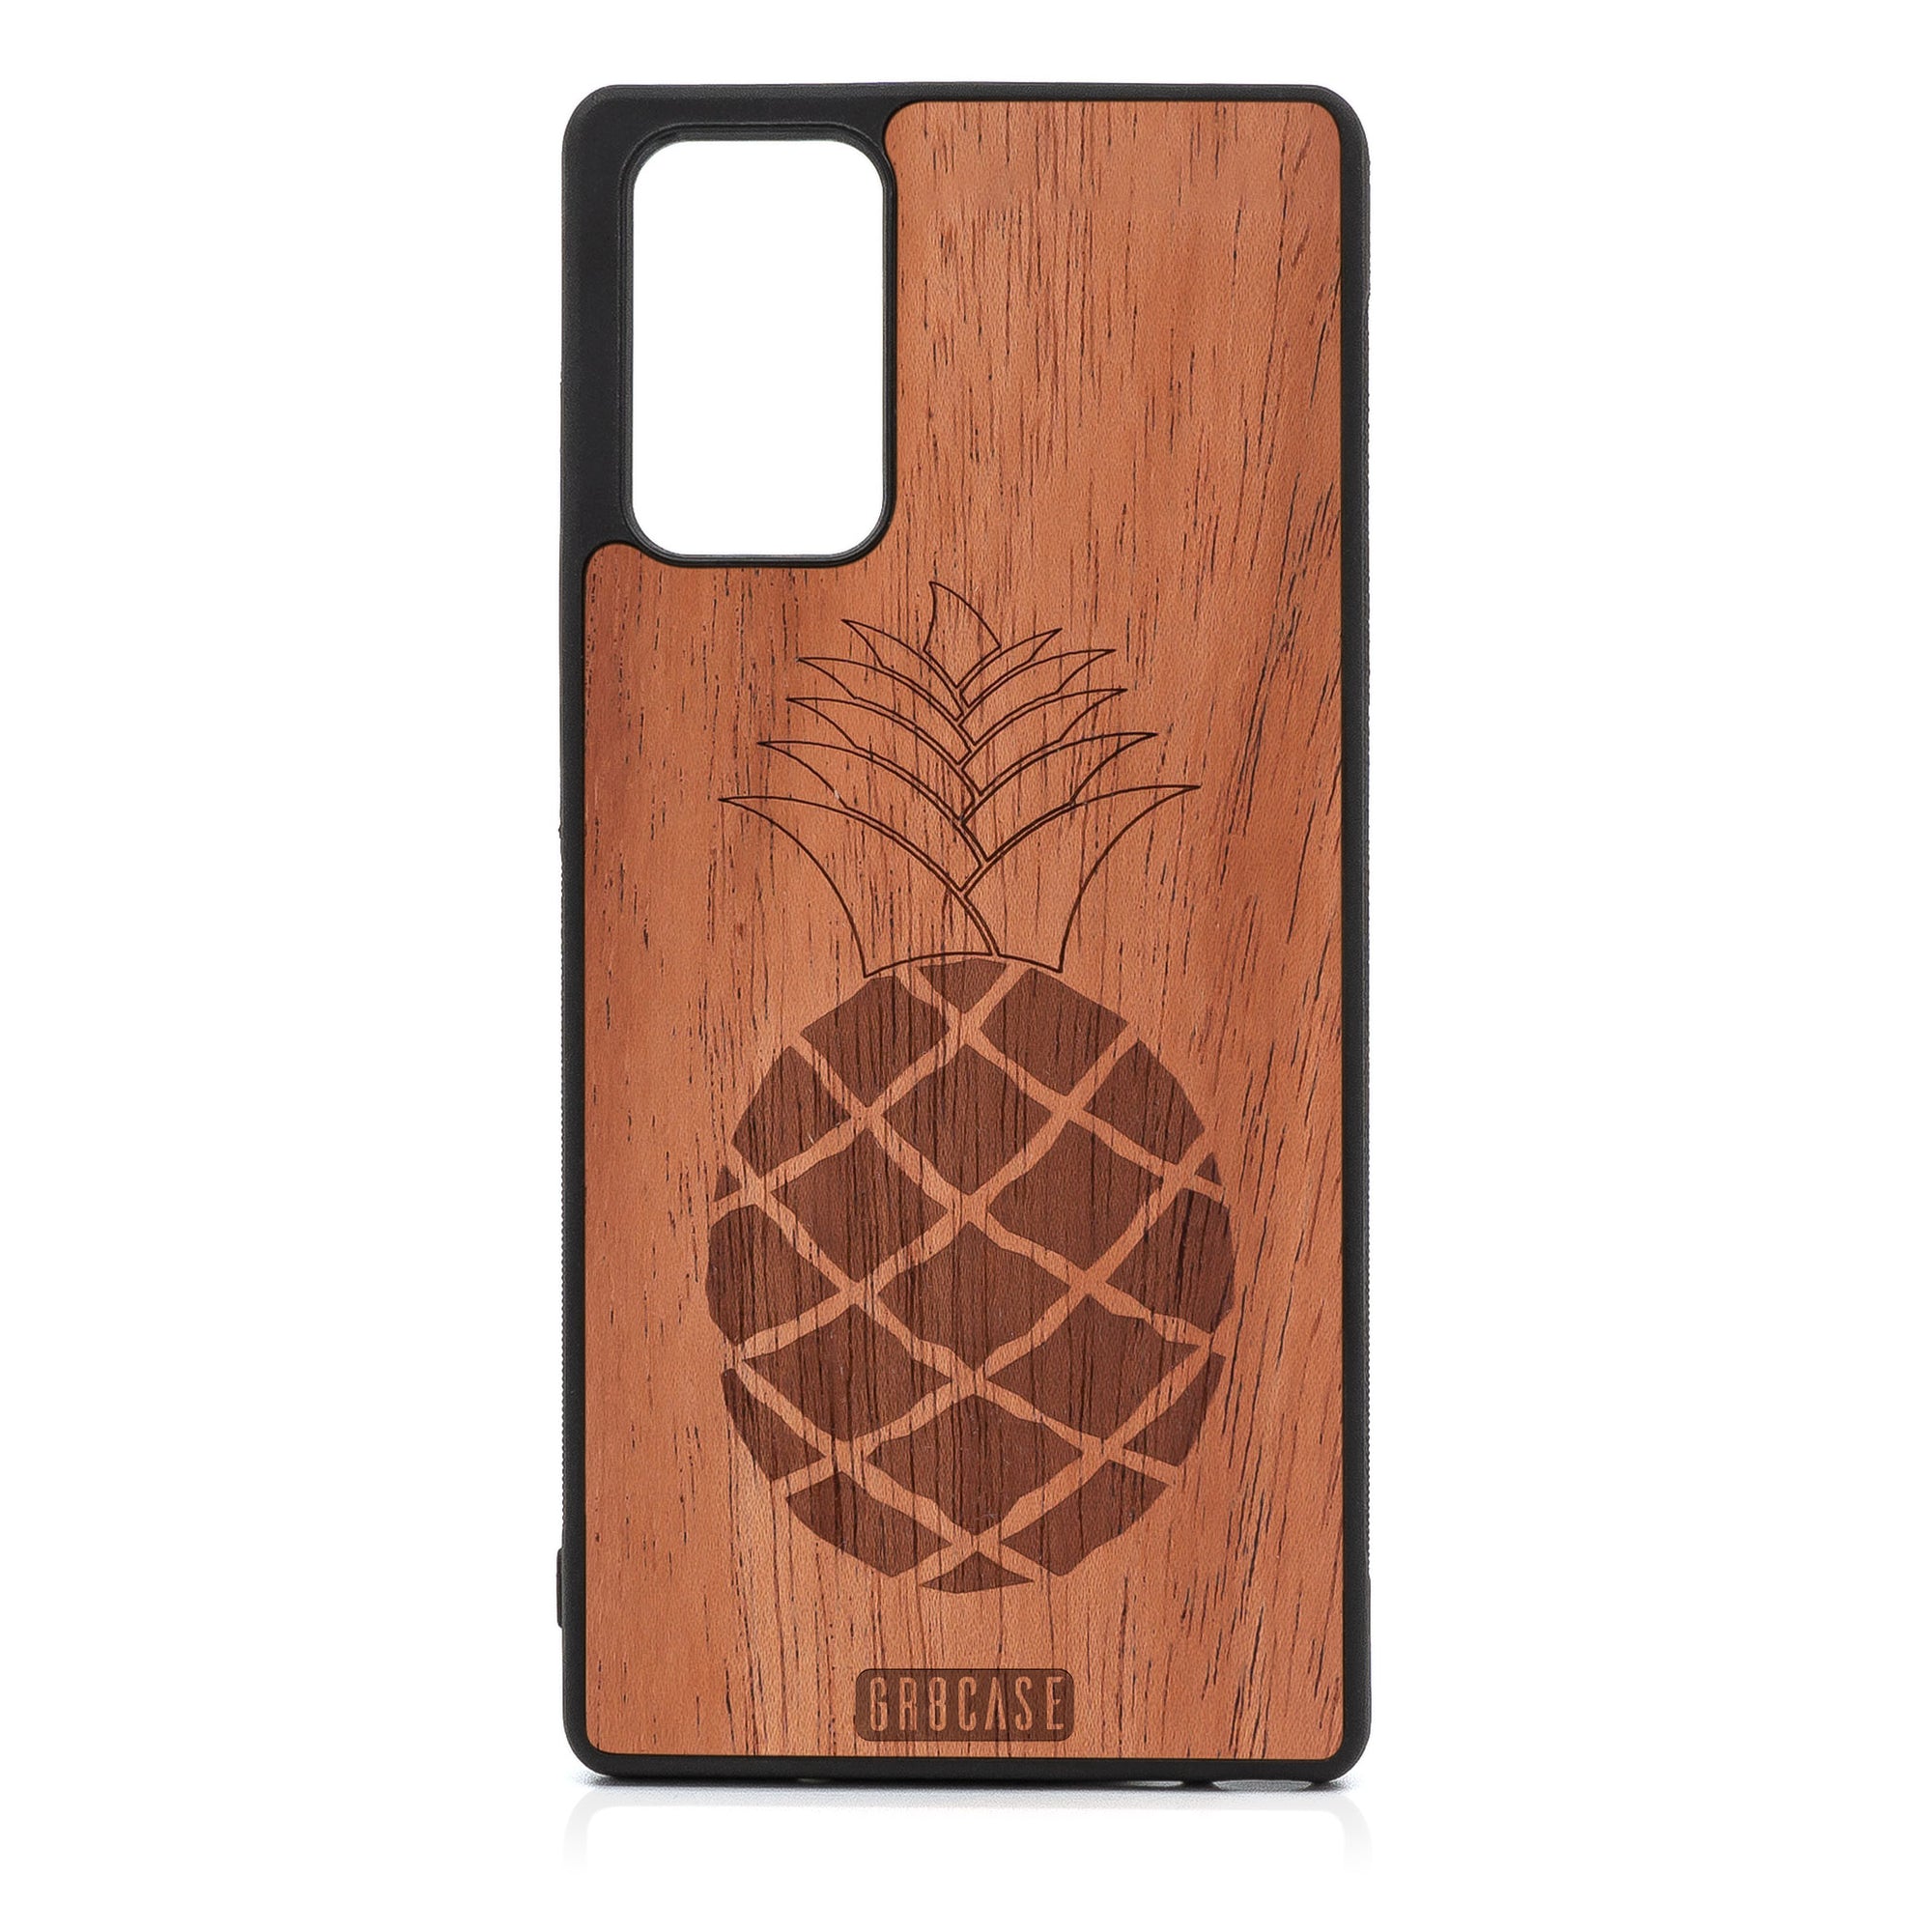 Pineapple Design Wood Case For Samsung Galaxy Note 20